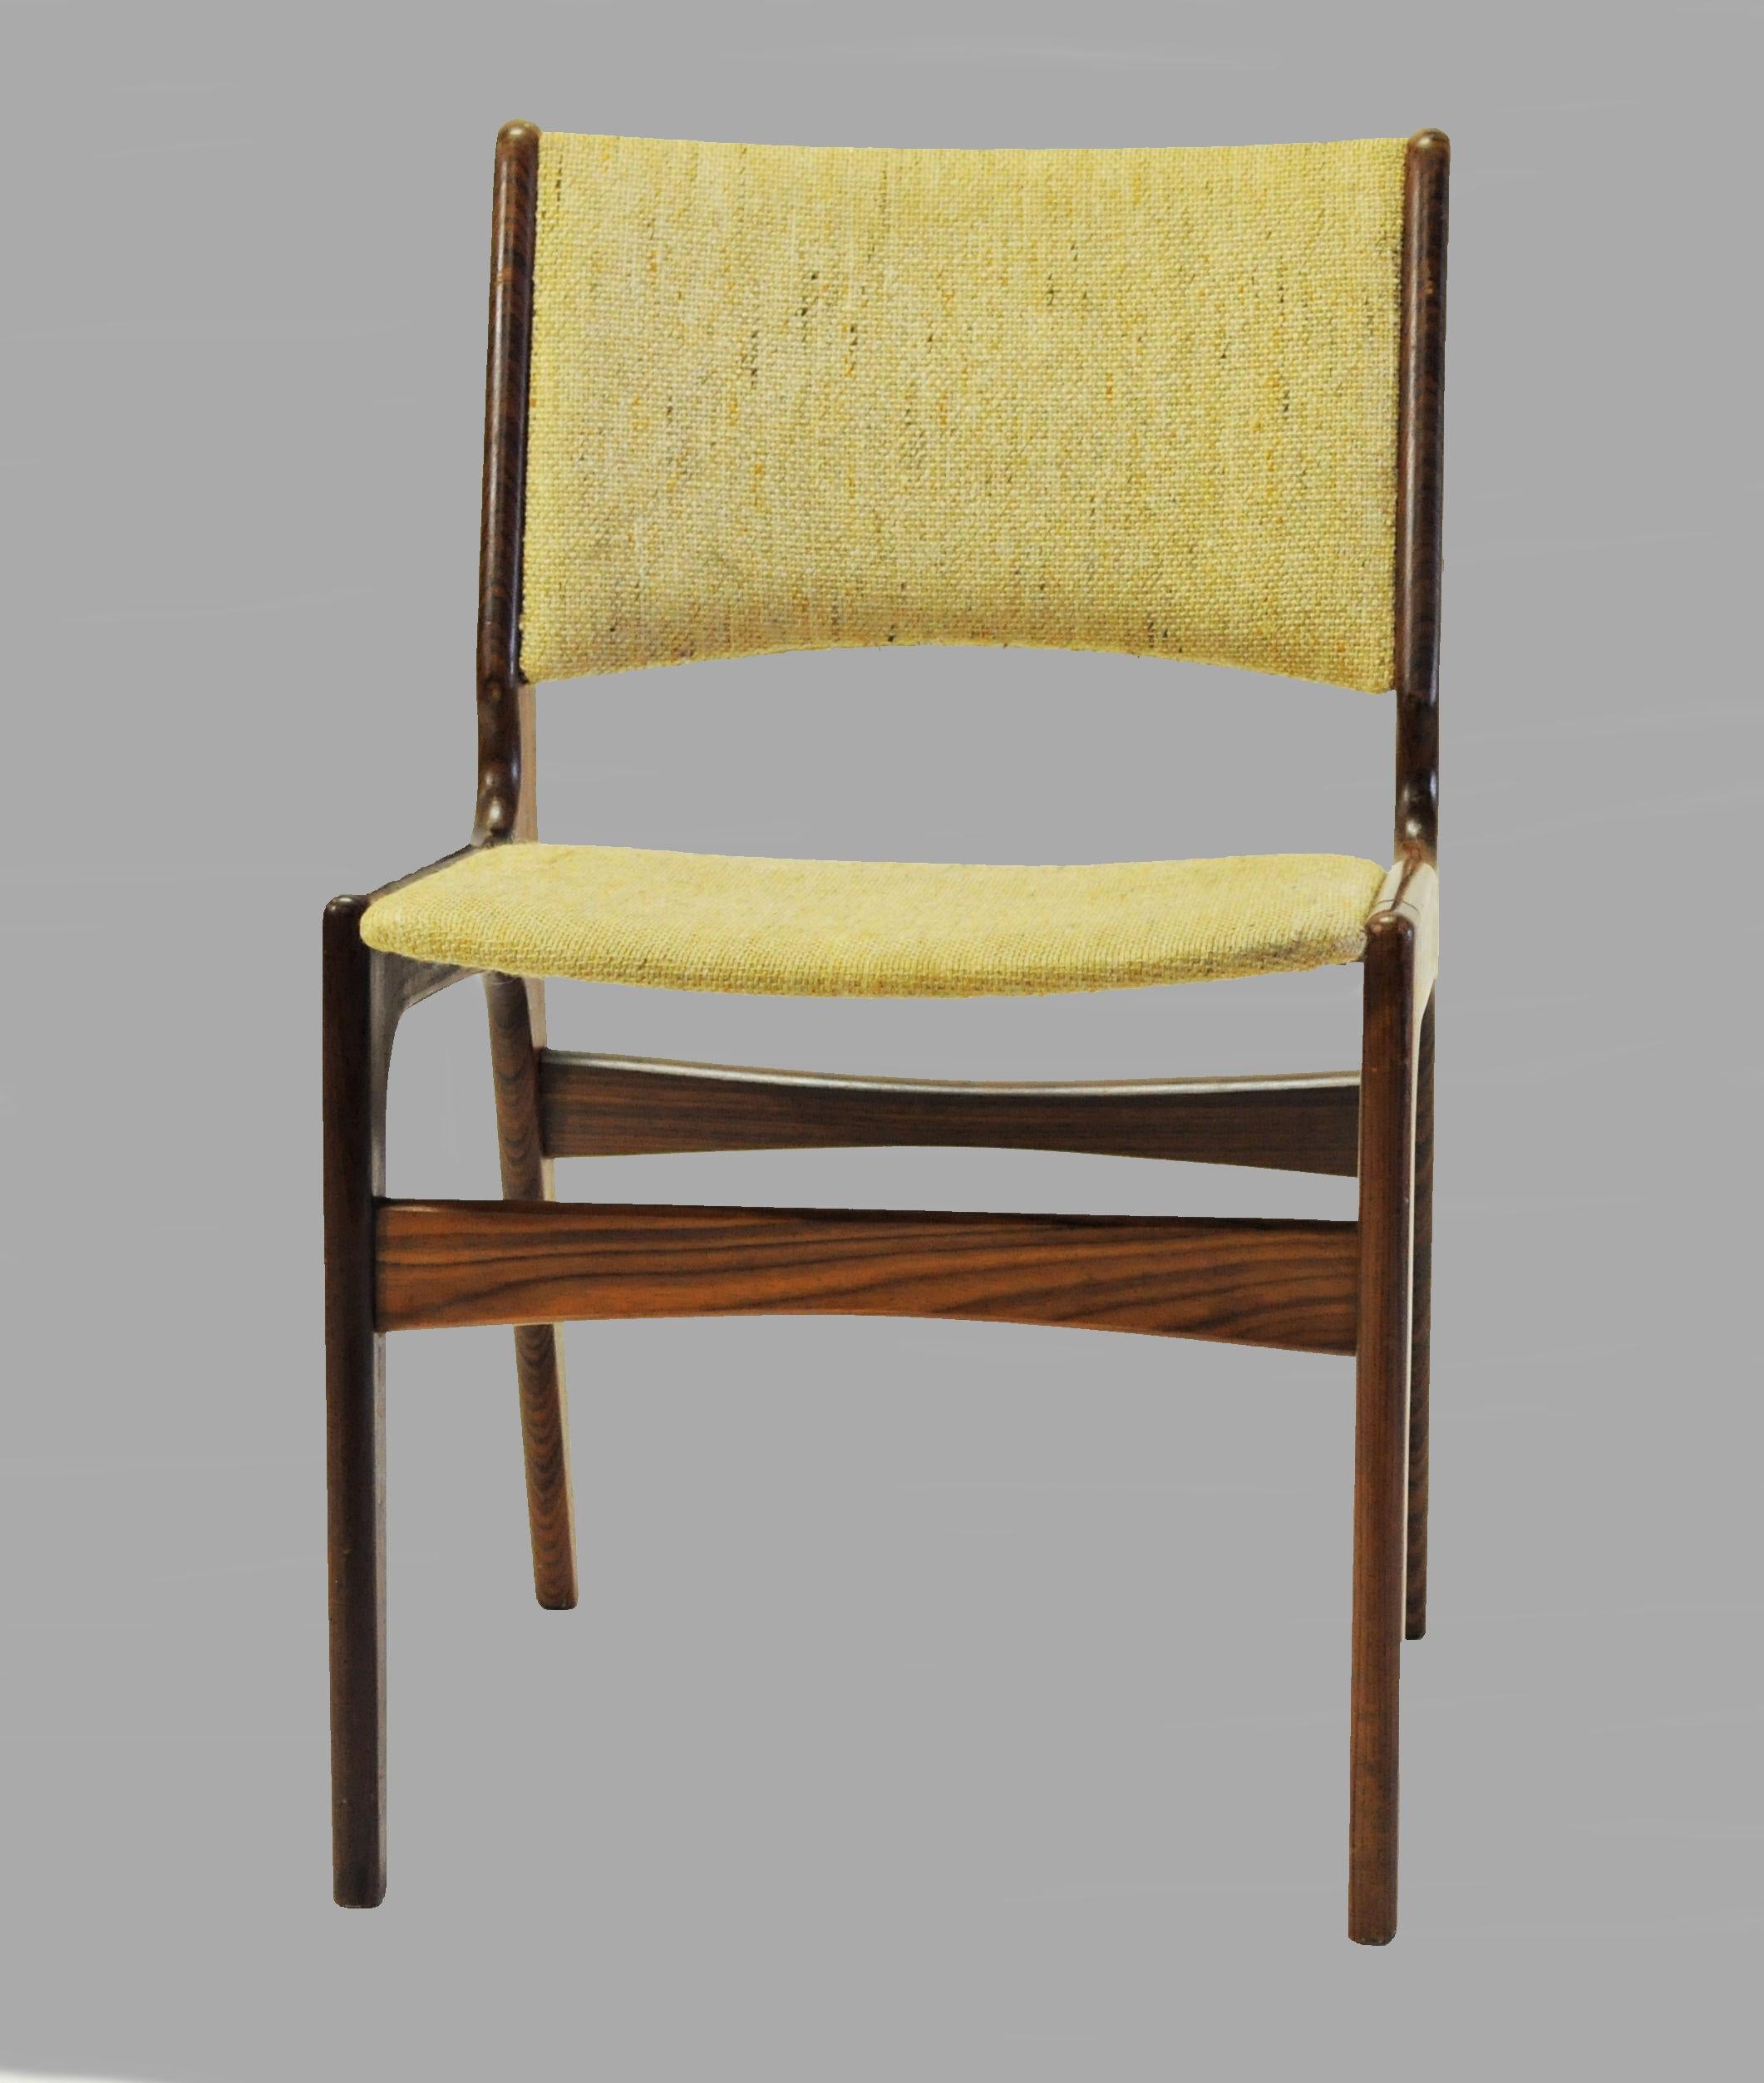 Set of six Erik Buch dining chairs made by Anderstrup Møbelfabrik.

The chairs are made in bubinga wood also known as African rosewood and feature a solid wooden frame and are as all of Erik Buchs chairs characterized by top quality materials,